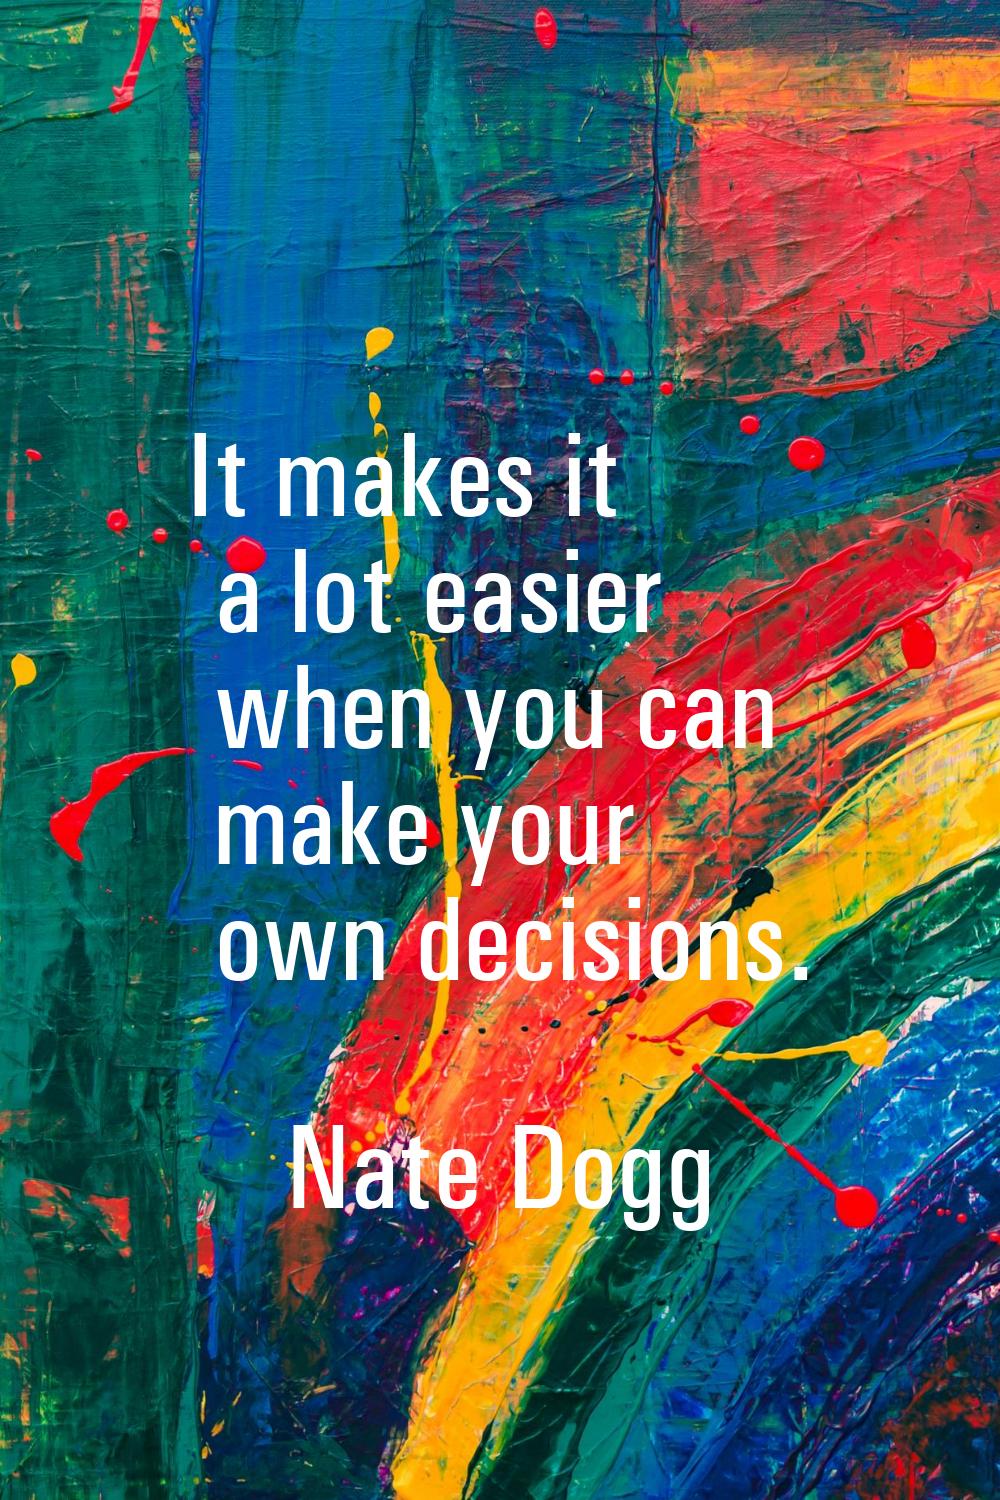 It makes it a lot easier when you can make your own decisions.